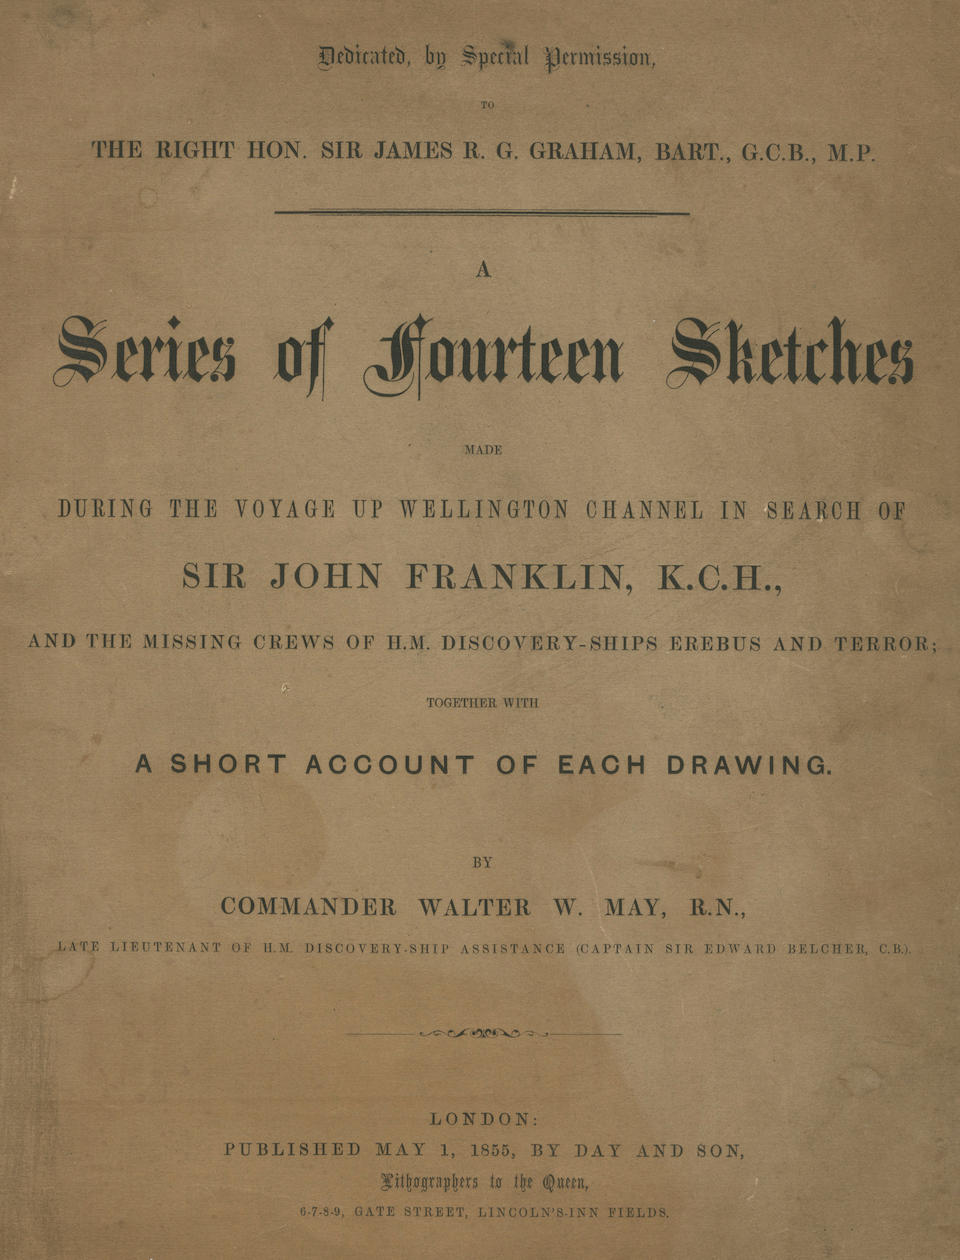 FRANKLIN EXPEDITION MAY (WALTER A.) A Series of Fourteen Sketches Made During the Voyage Up Wellington Channel in Search of Sir John Franklin, K.C.H., and the Missing Crews of H.M. Discovery-Ships Erebus and Terror, FIRST EDITION, Day and Son, 1 May 1855